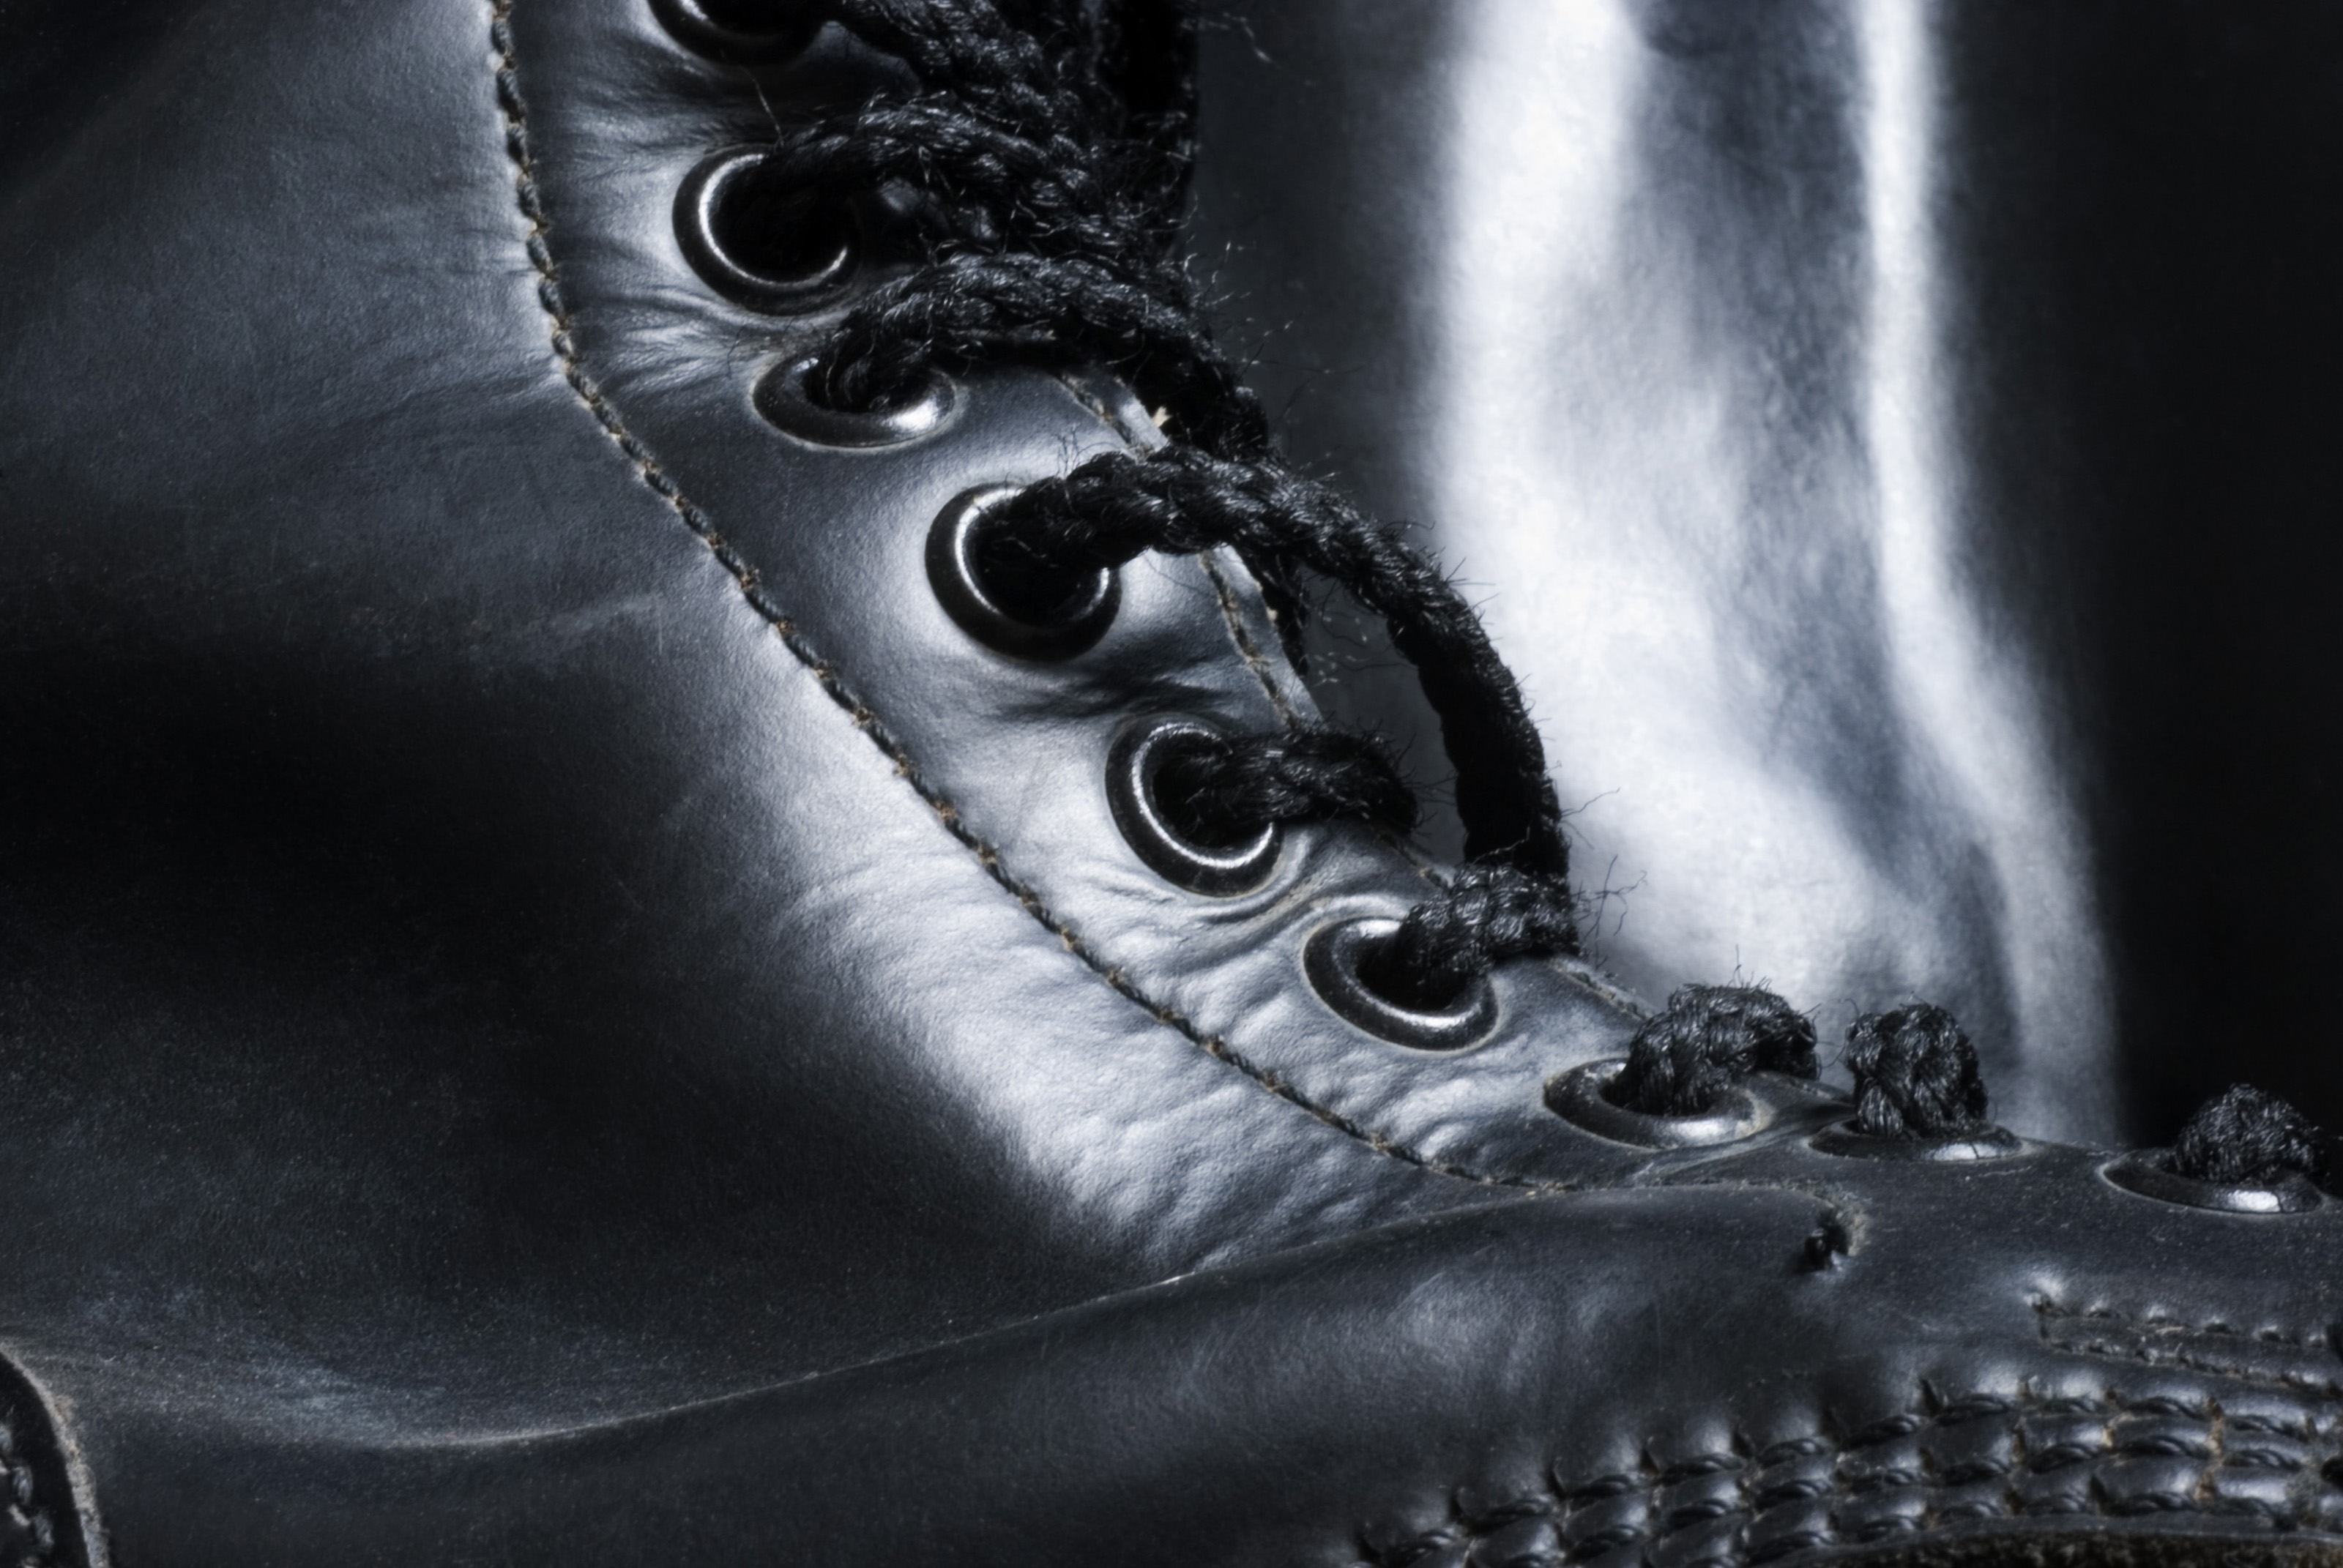 Laced Black Punk Boots-3961 | Stockarch Free Stock Photo Archive